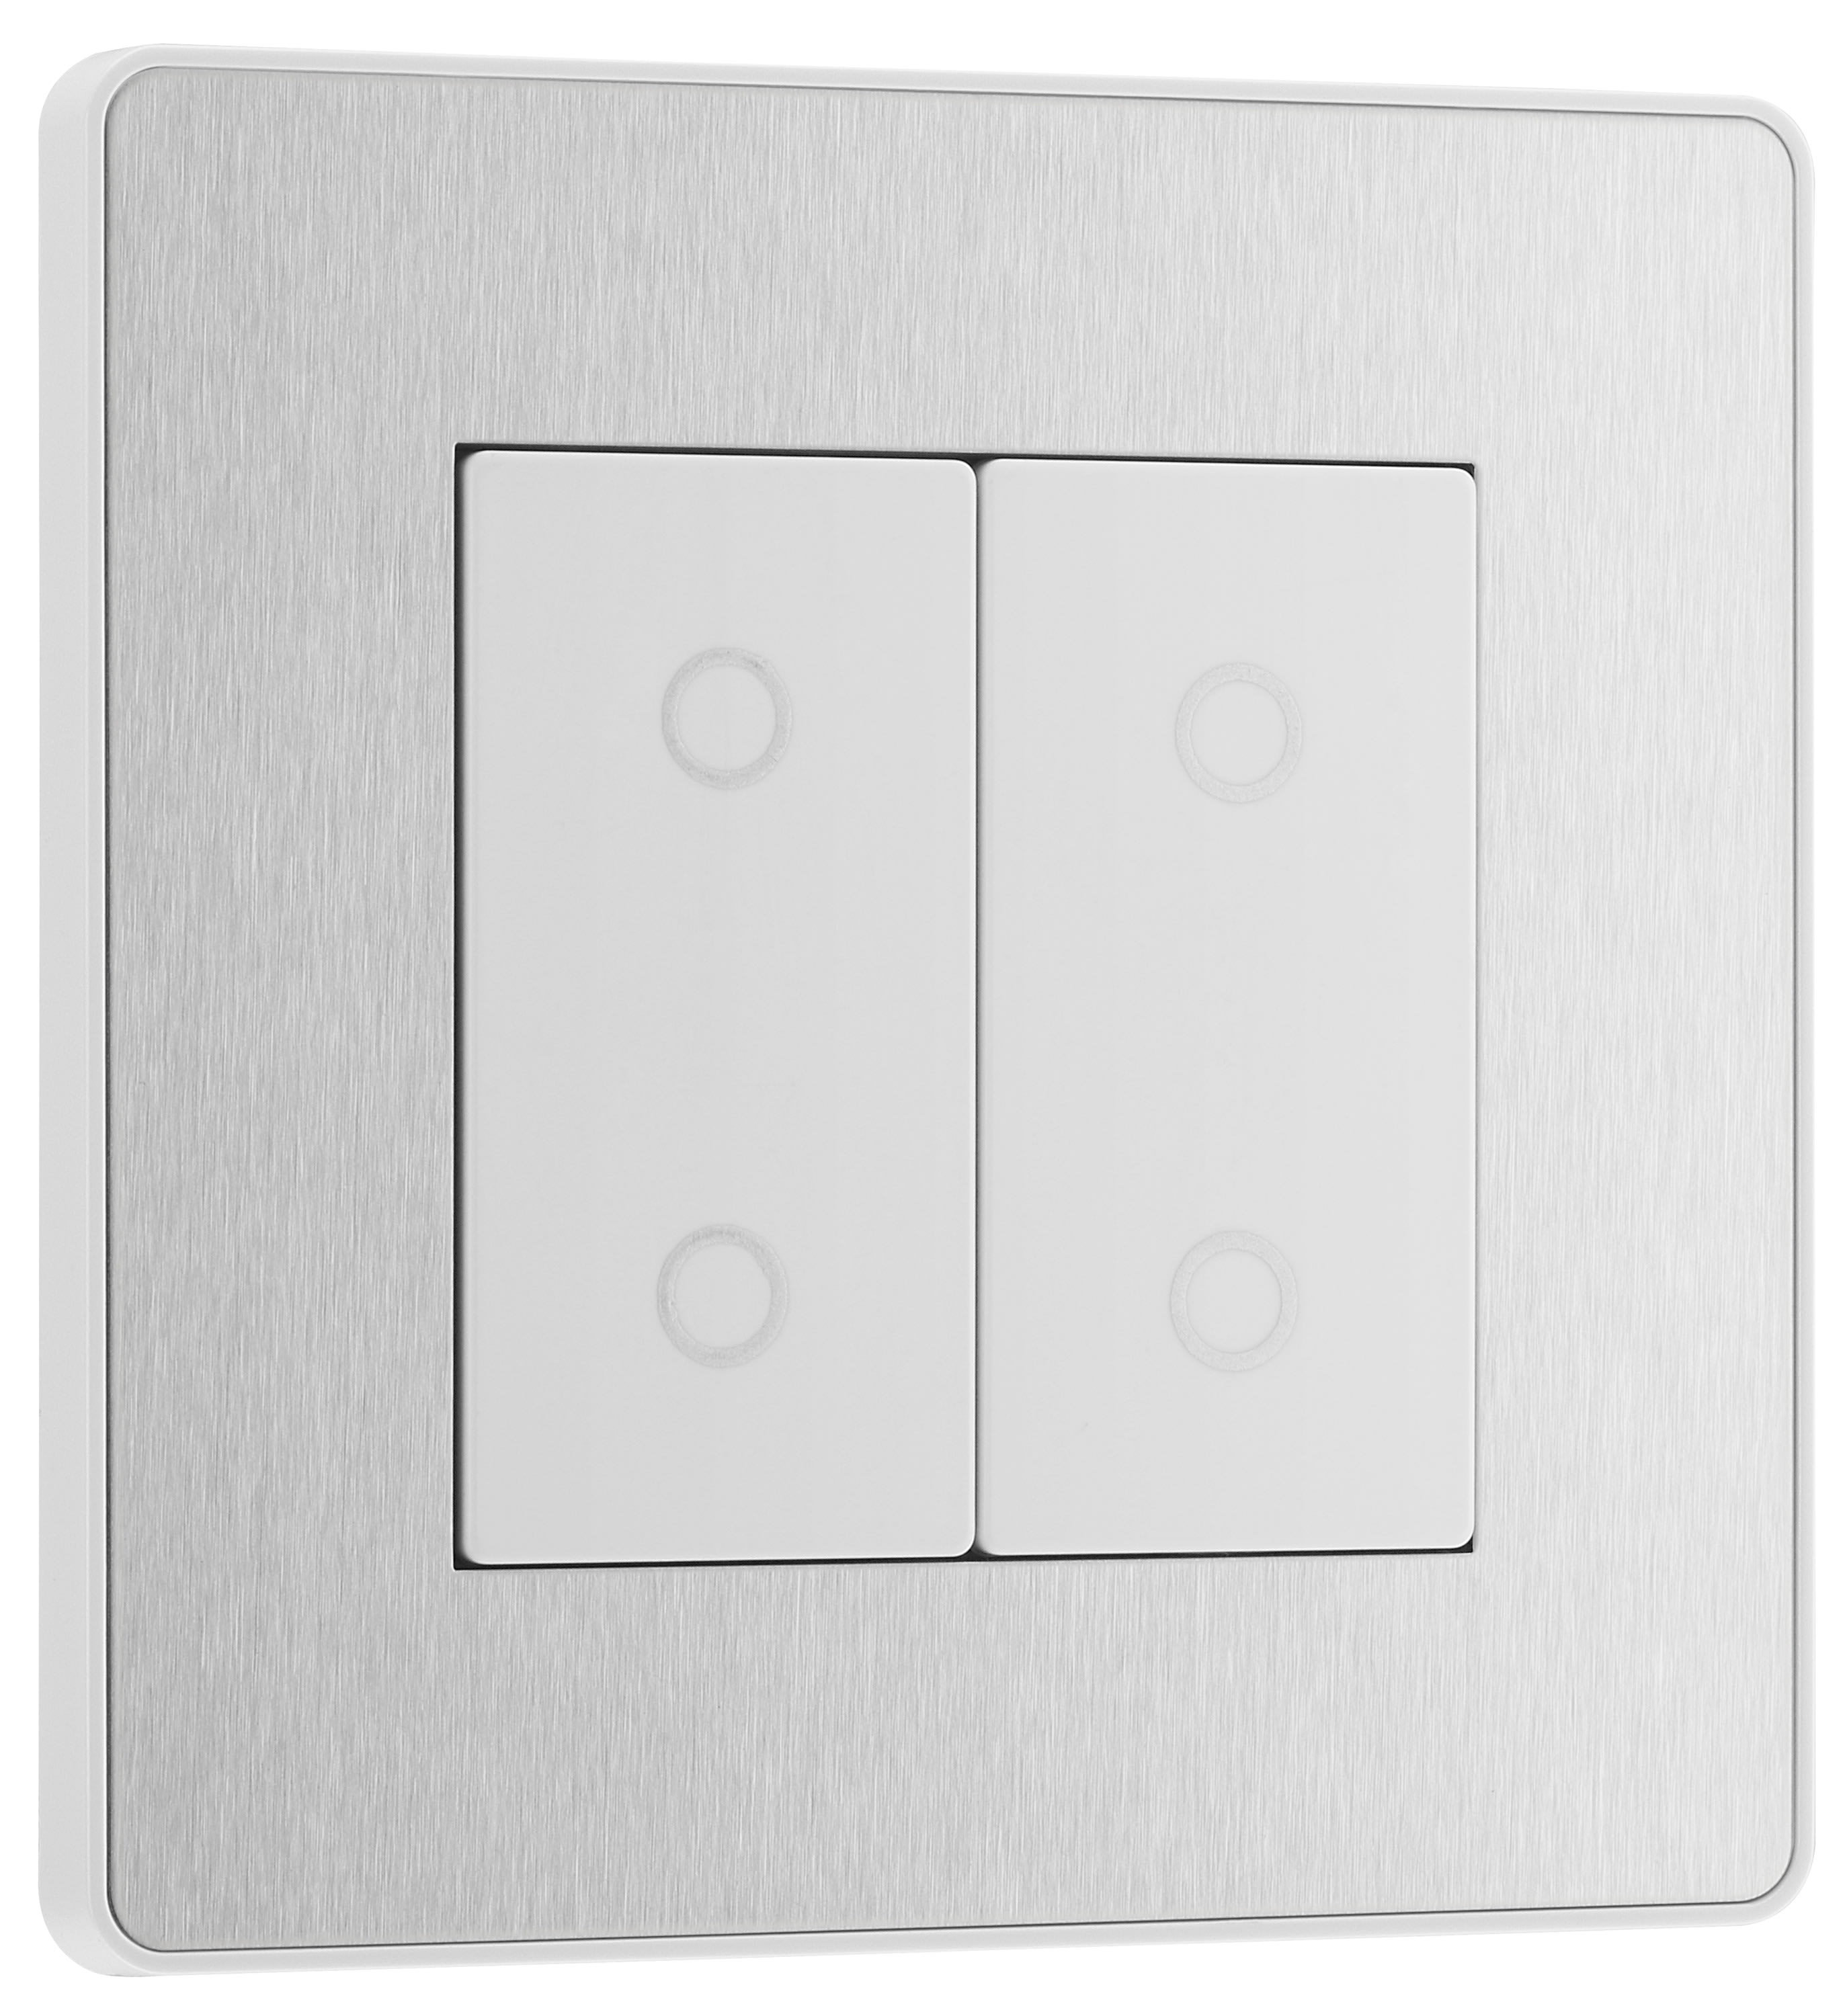 Bg Evolve Brushed Steel 2 Way Master Double Touch Dimmer Switch 200w